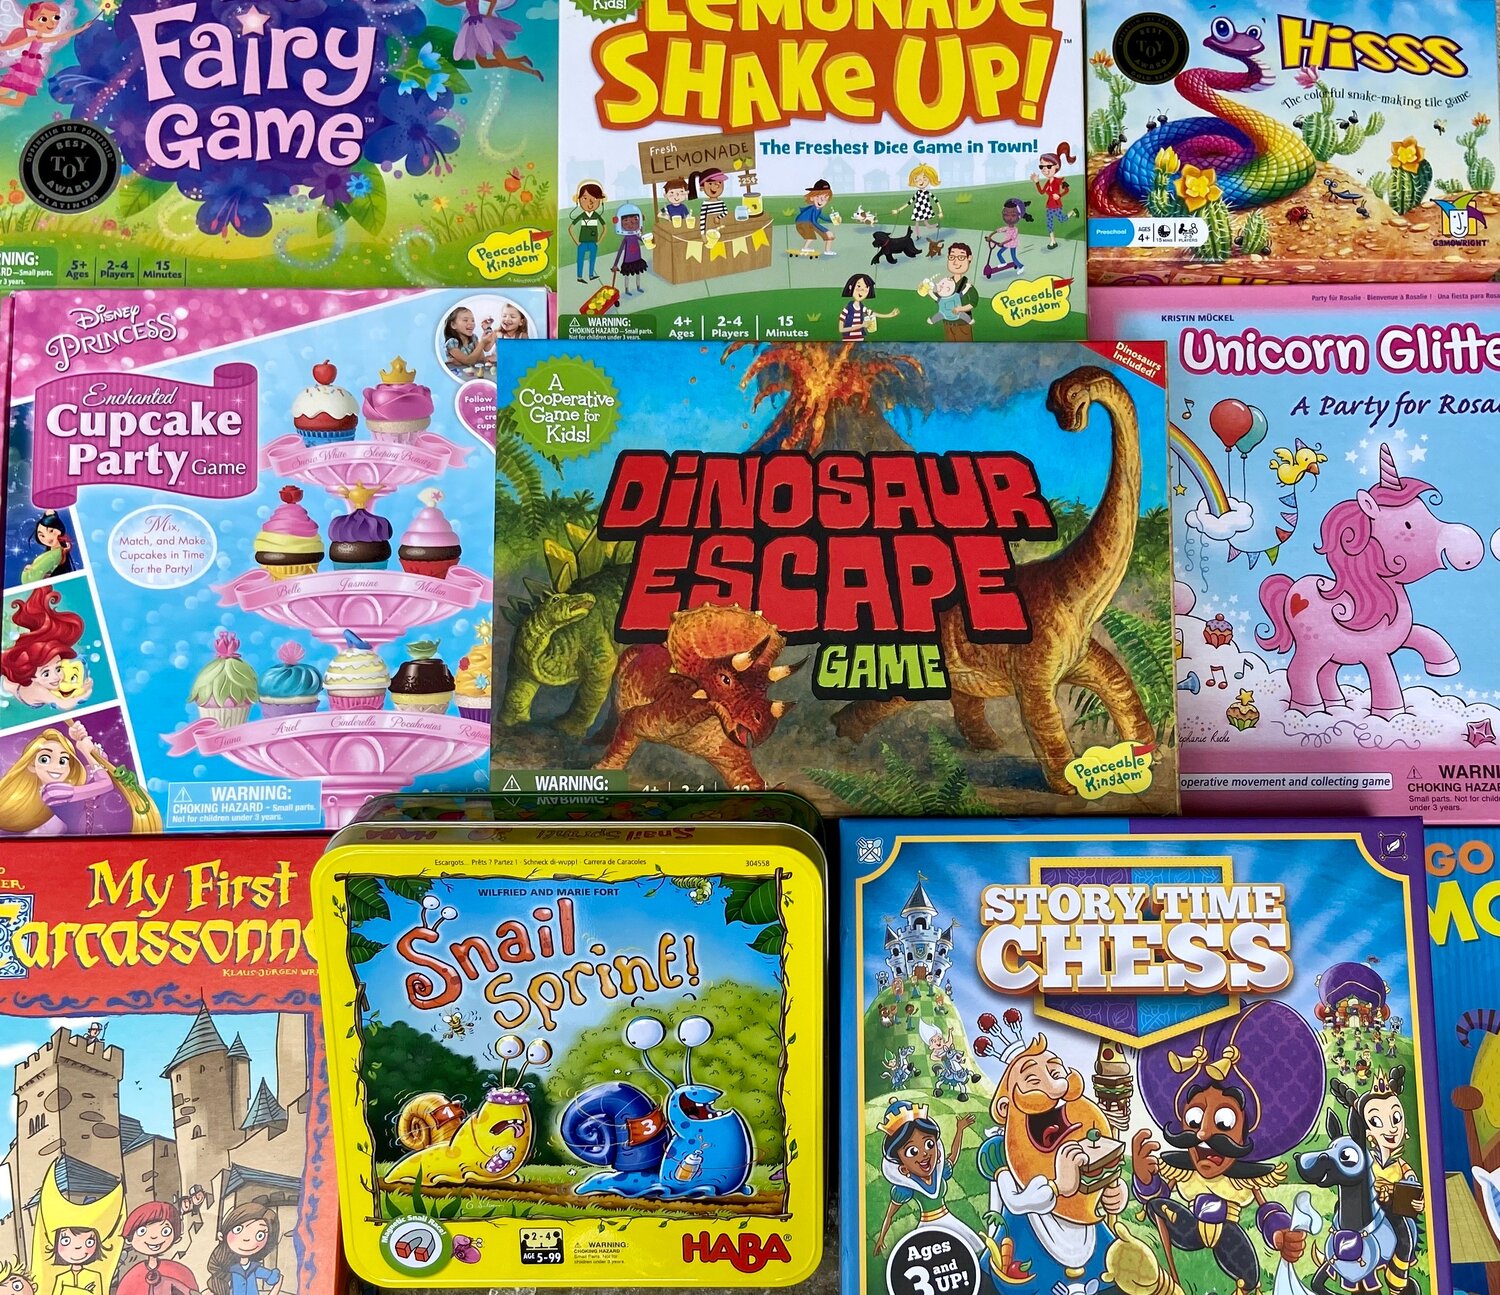 Awesome Games for 4 and 5 Year Olds